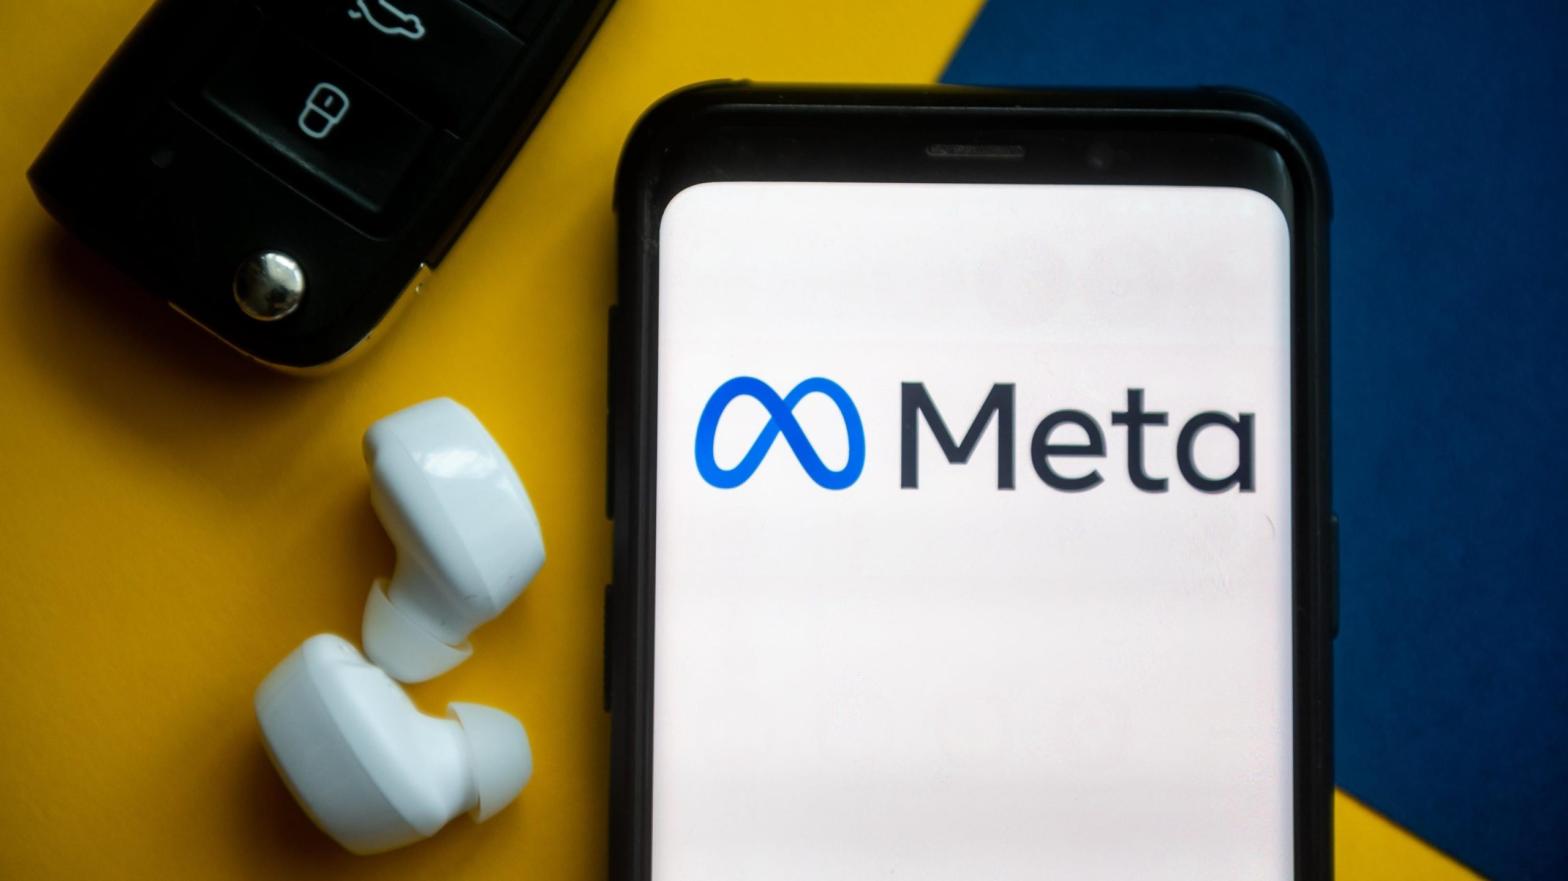 The Meta logo displayed on a smartphone next to wireless earphones and... car keys, for some reason. Used here as stock photo. (Photo: Mateusz Slodkowski / SOPA Images / LightRocket via Getty Images, Getty Images)